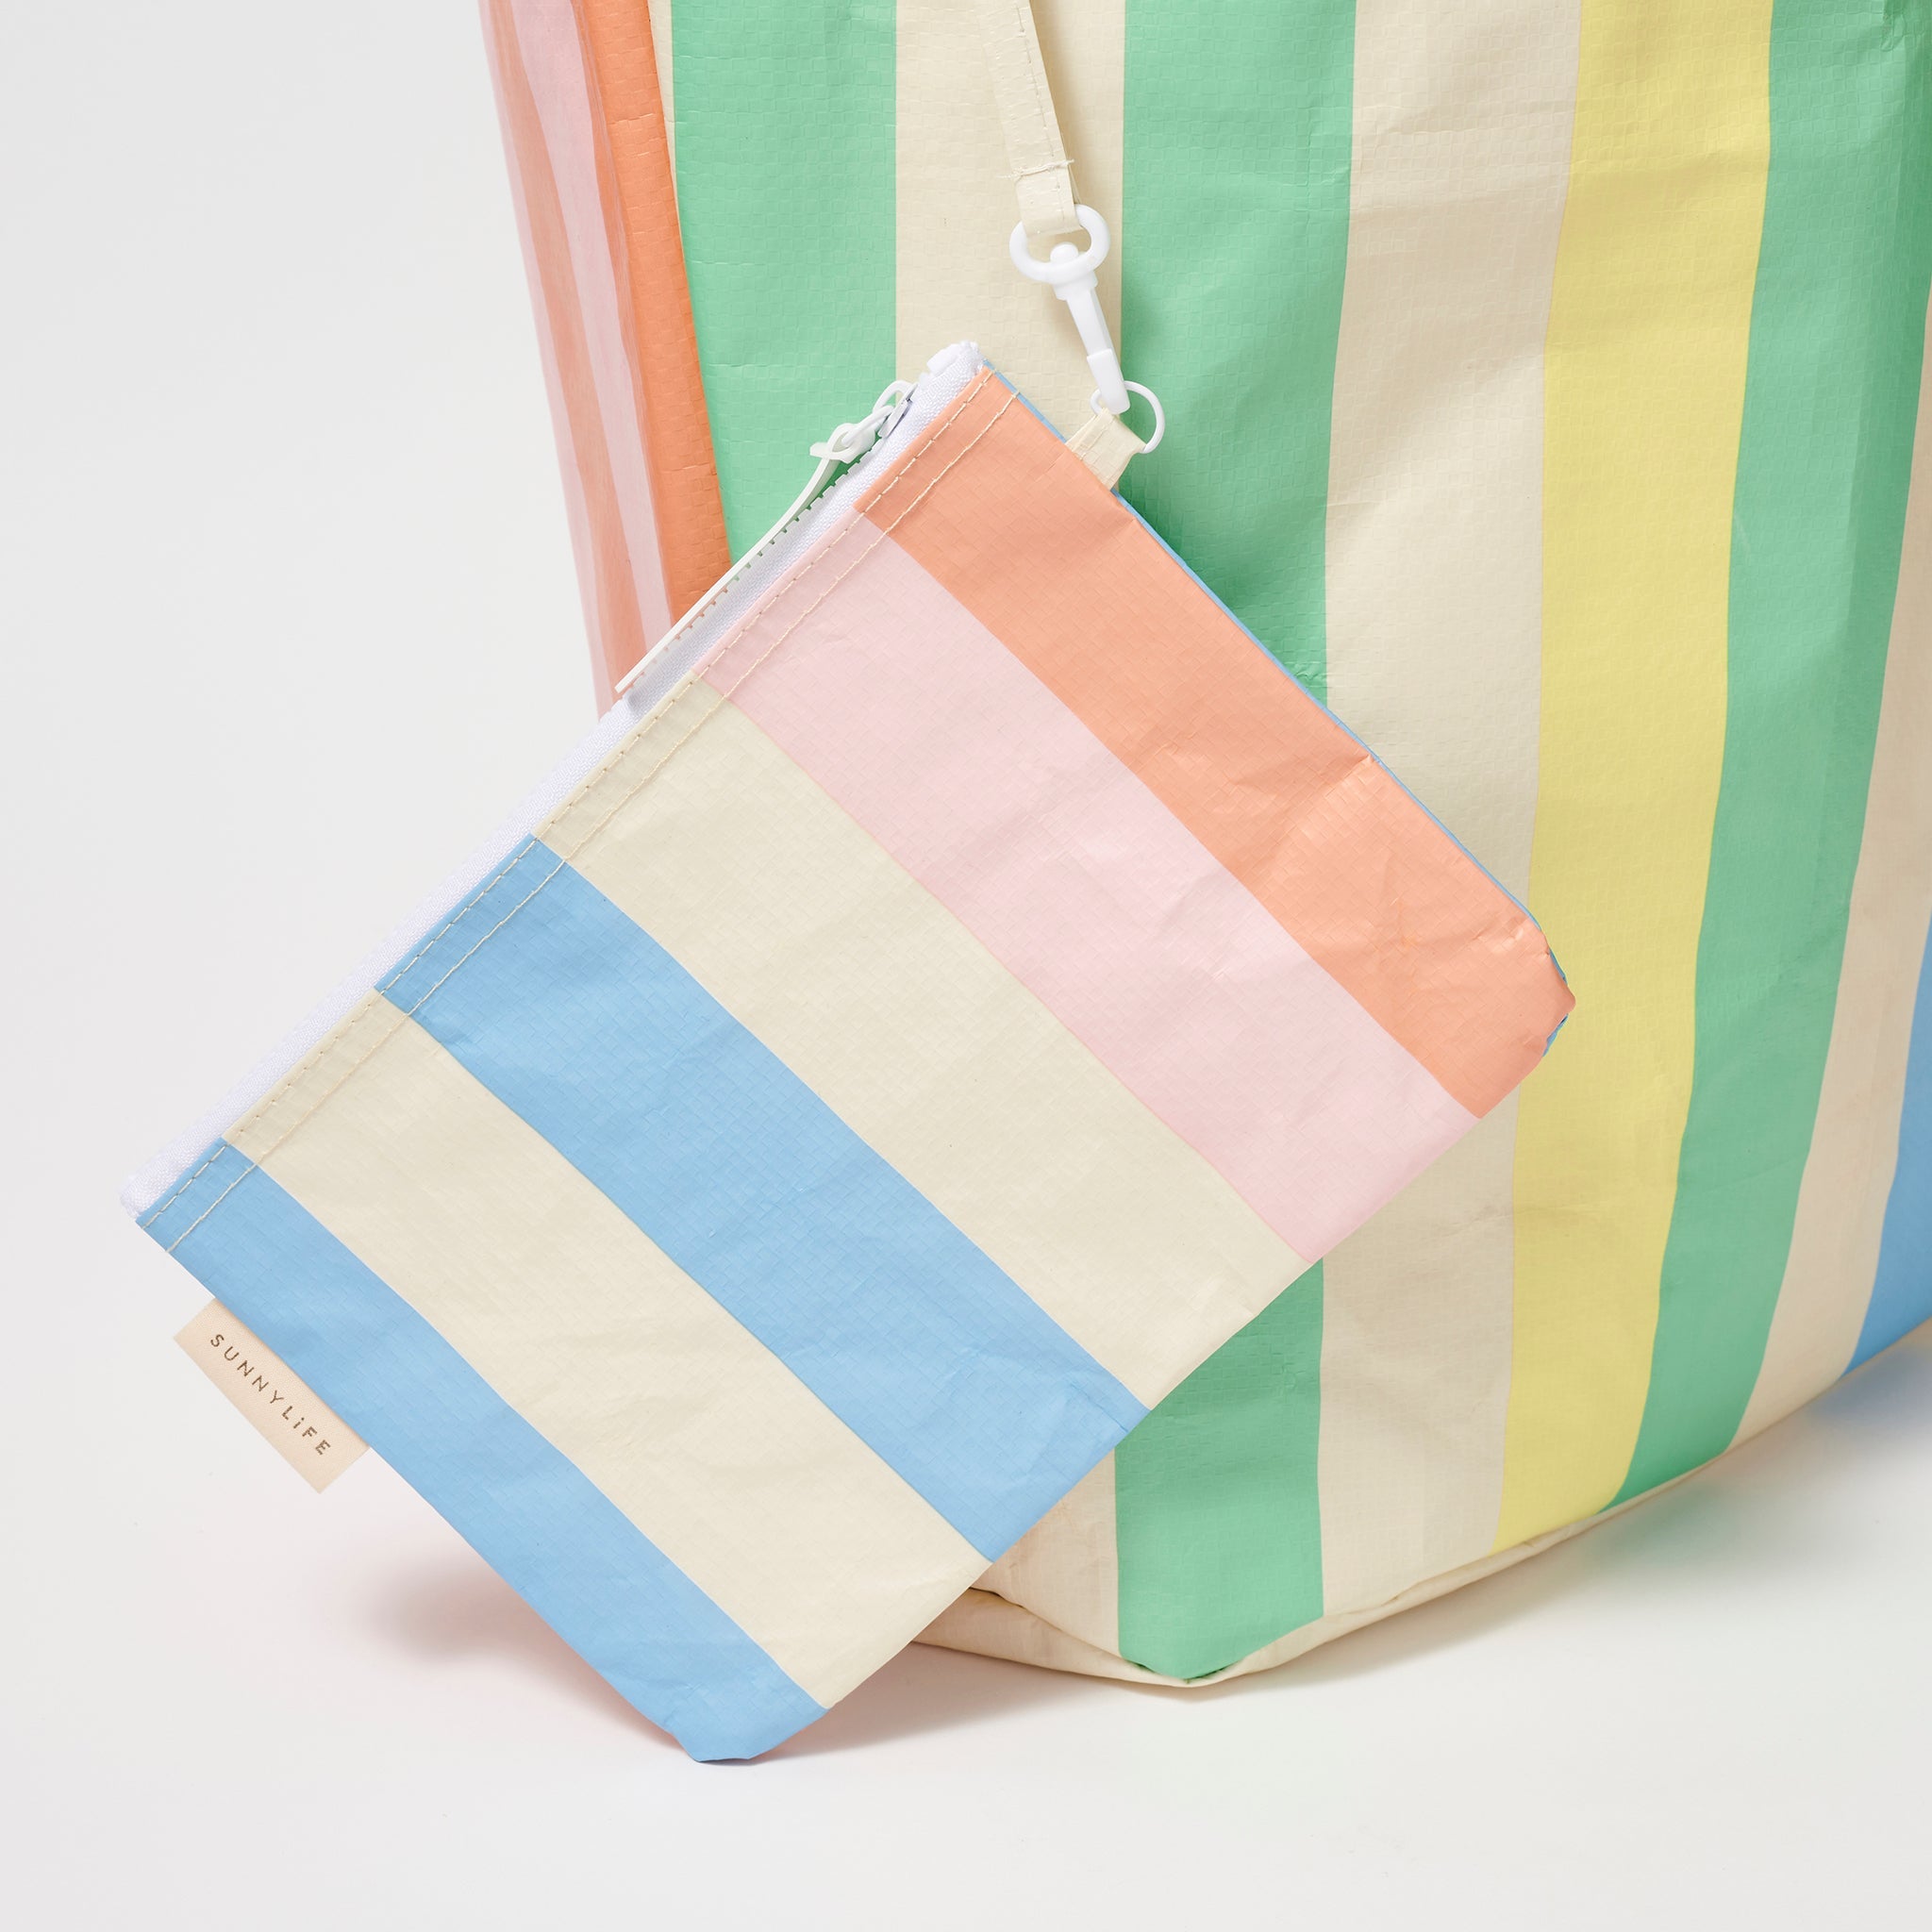 Large Open Woven Rainbow Tote